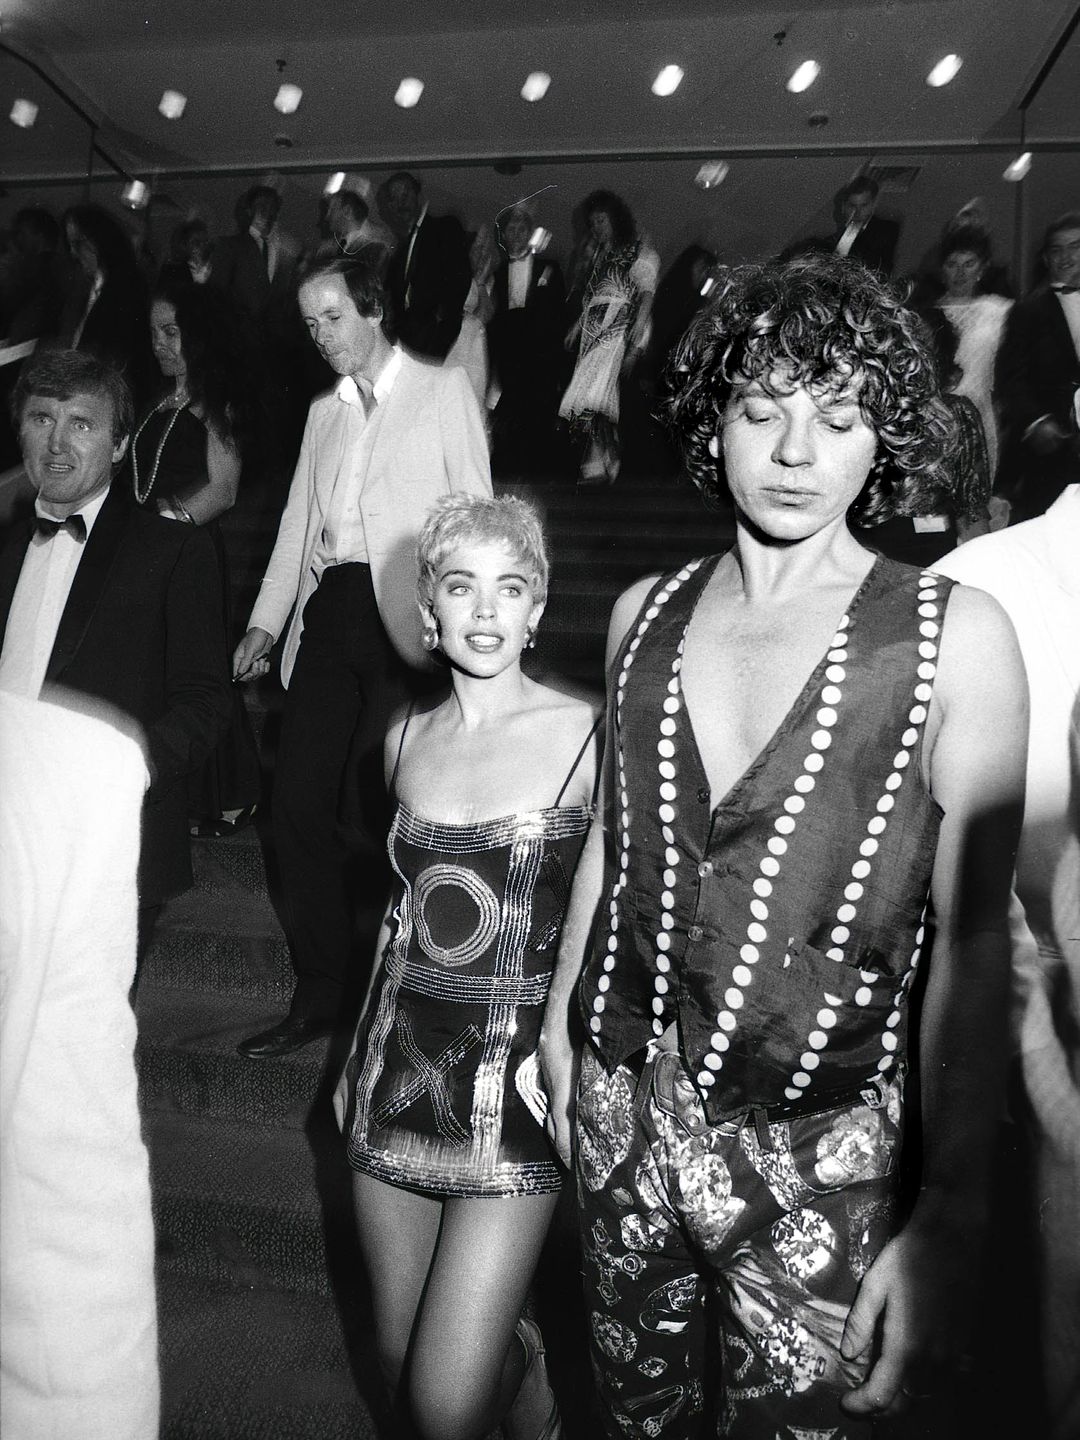 Kylie Minogue wearing a sparkly mini dress and holding hands with Michael Hutchence 